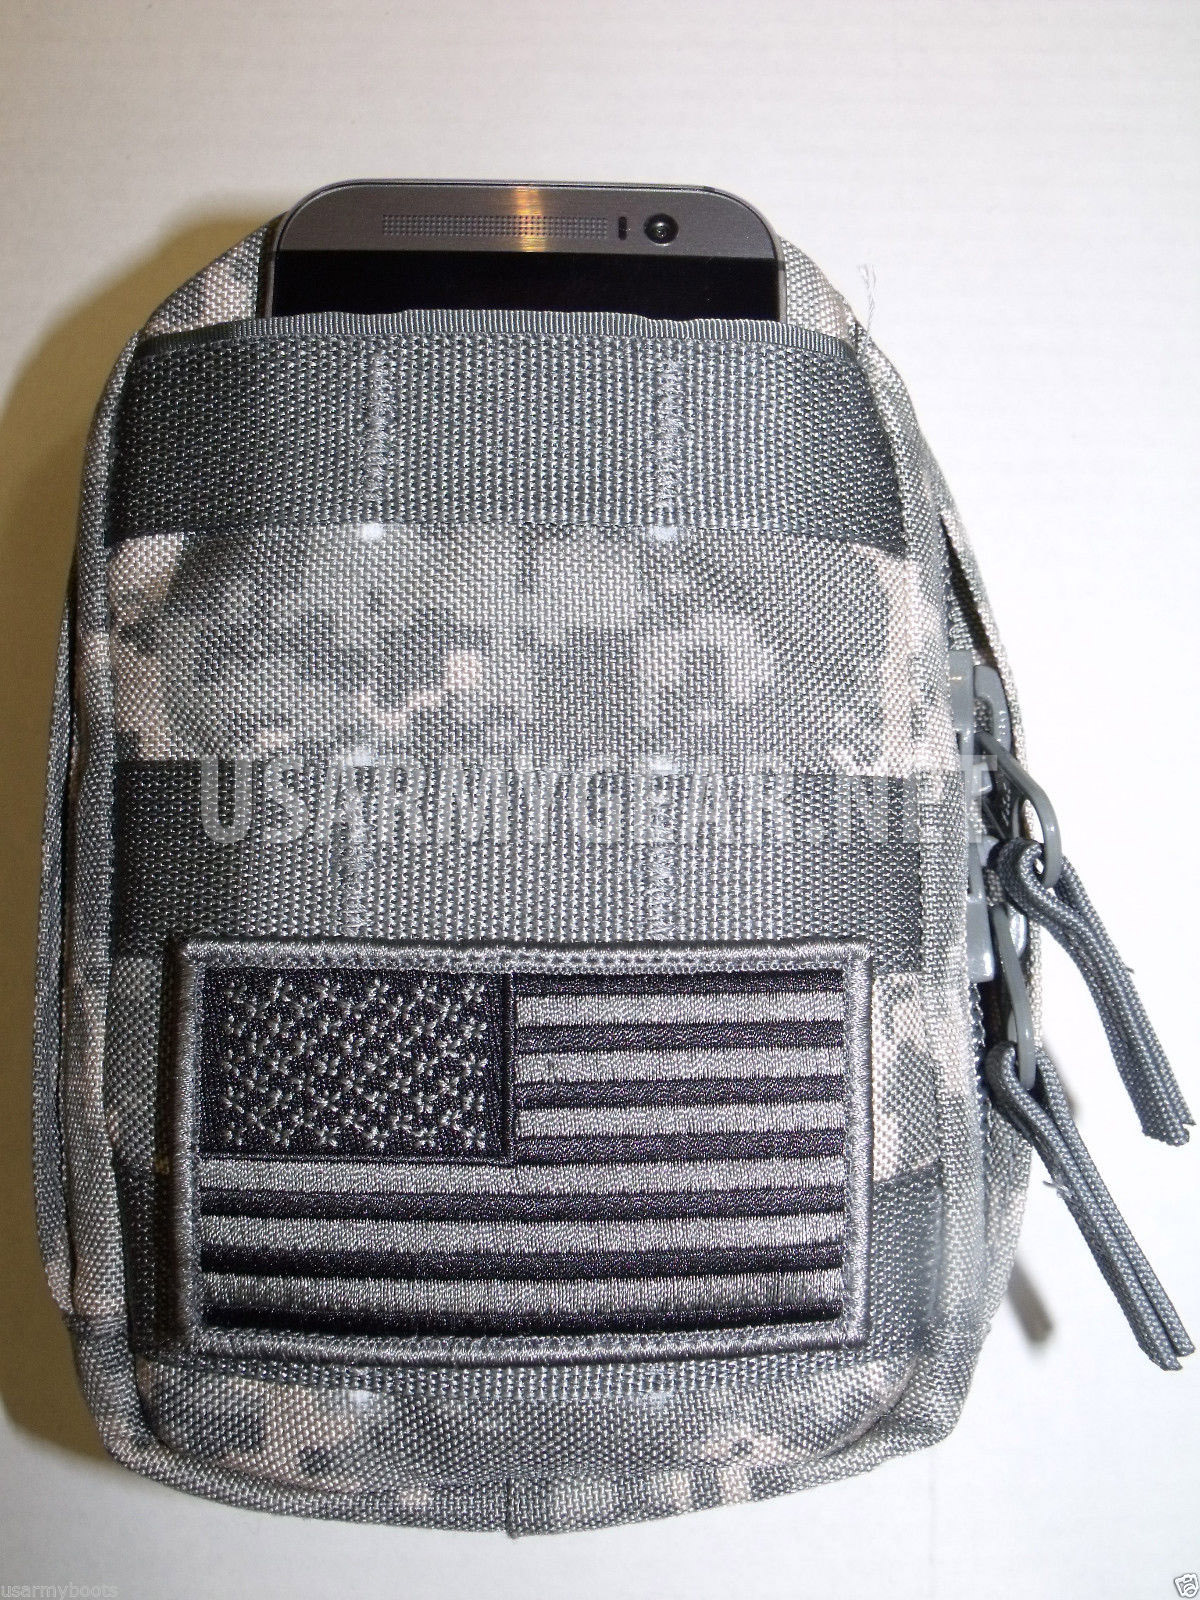 NEW ACU MOLLE ll Leaders Utility Admin Pouch Set w. Inserts